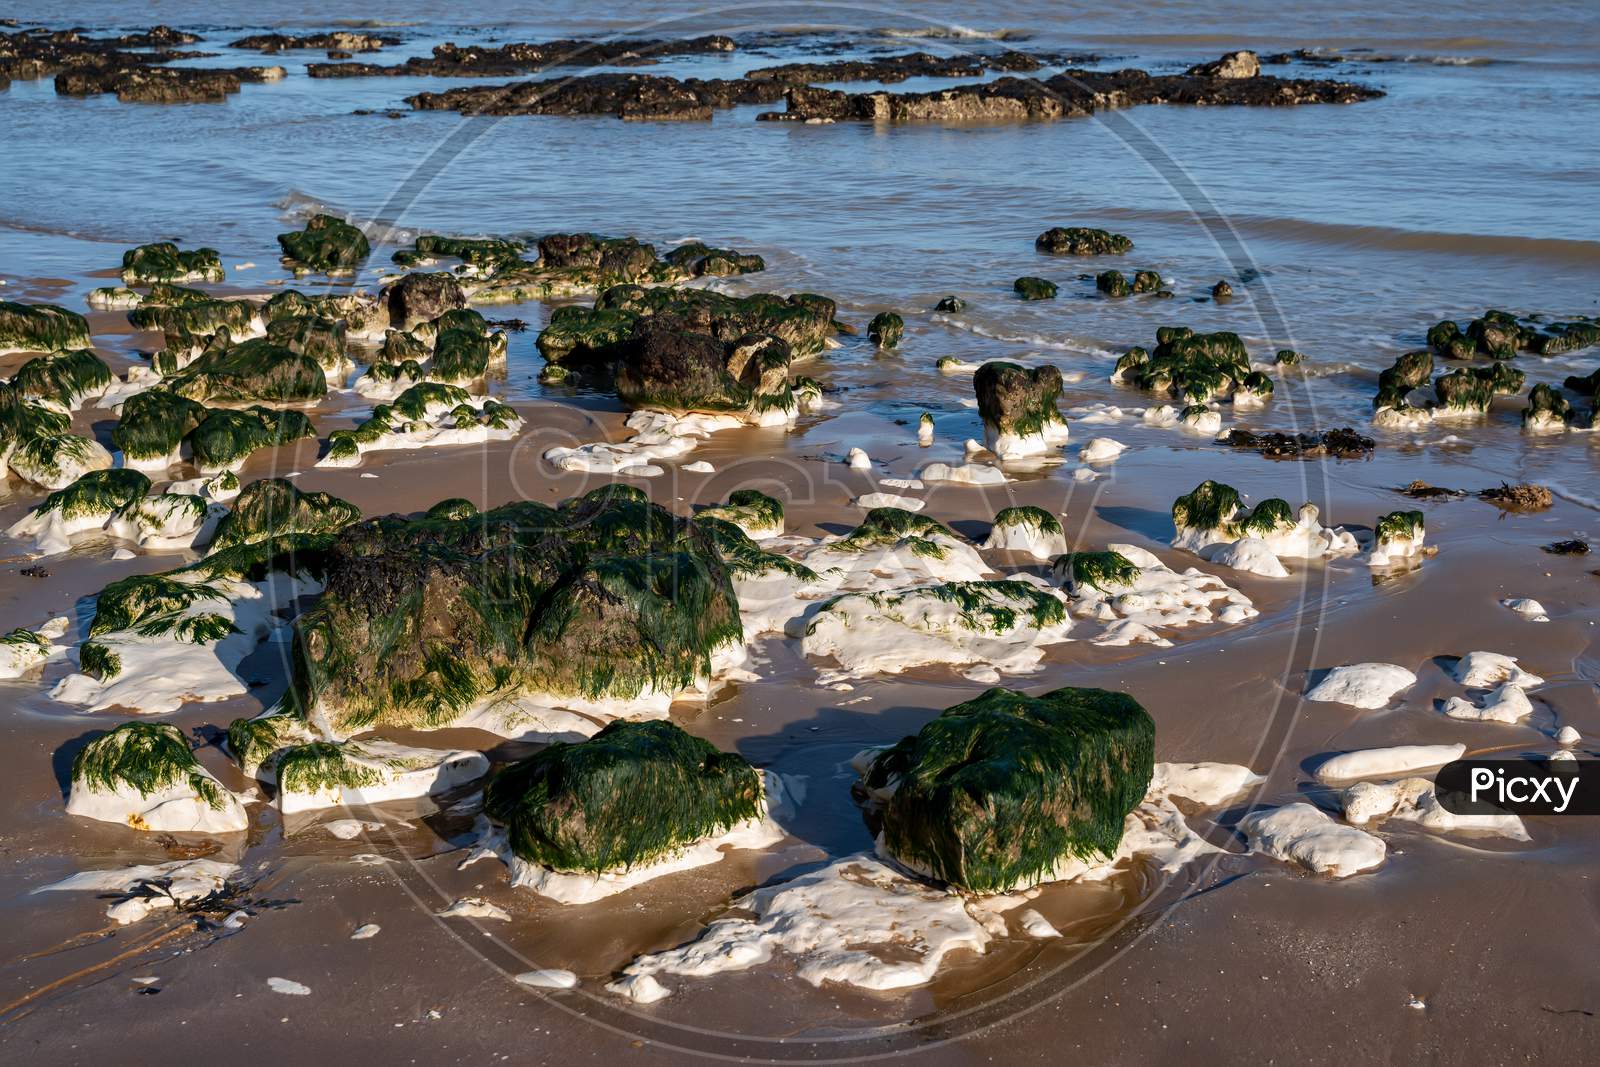 Chalk Rocks Exposed At Low Tide In Botany Bay Near Broadstairs In Kent